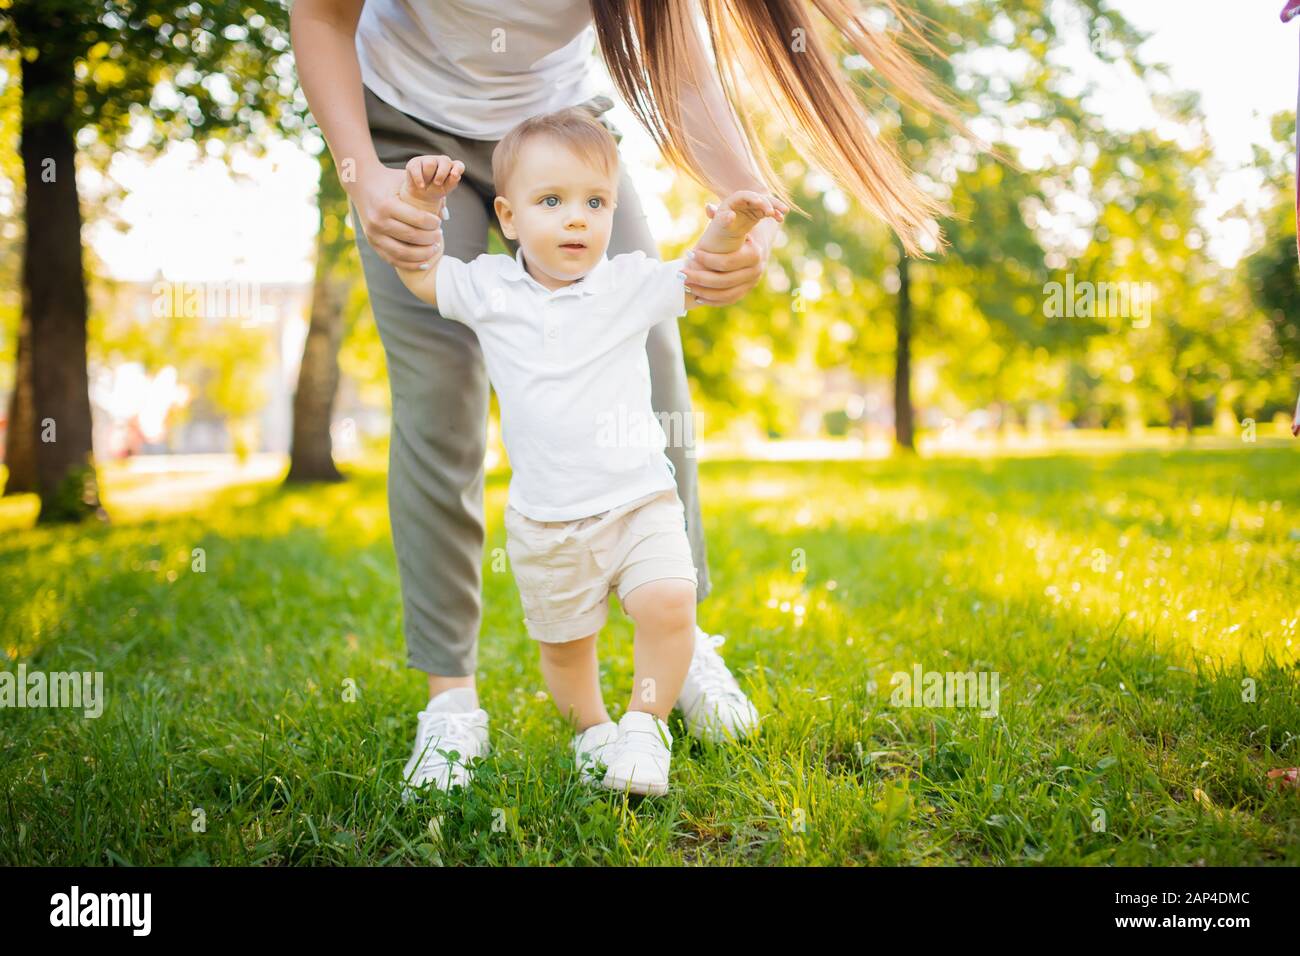 Child baby takes first step with help of mom in park. Concept parents teach walking Stock Photo